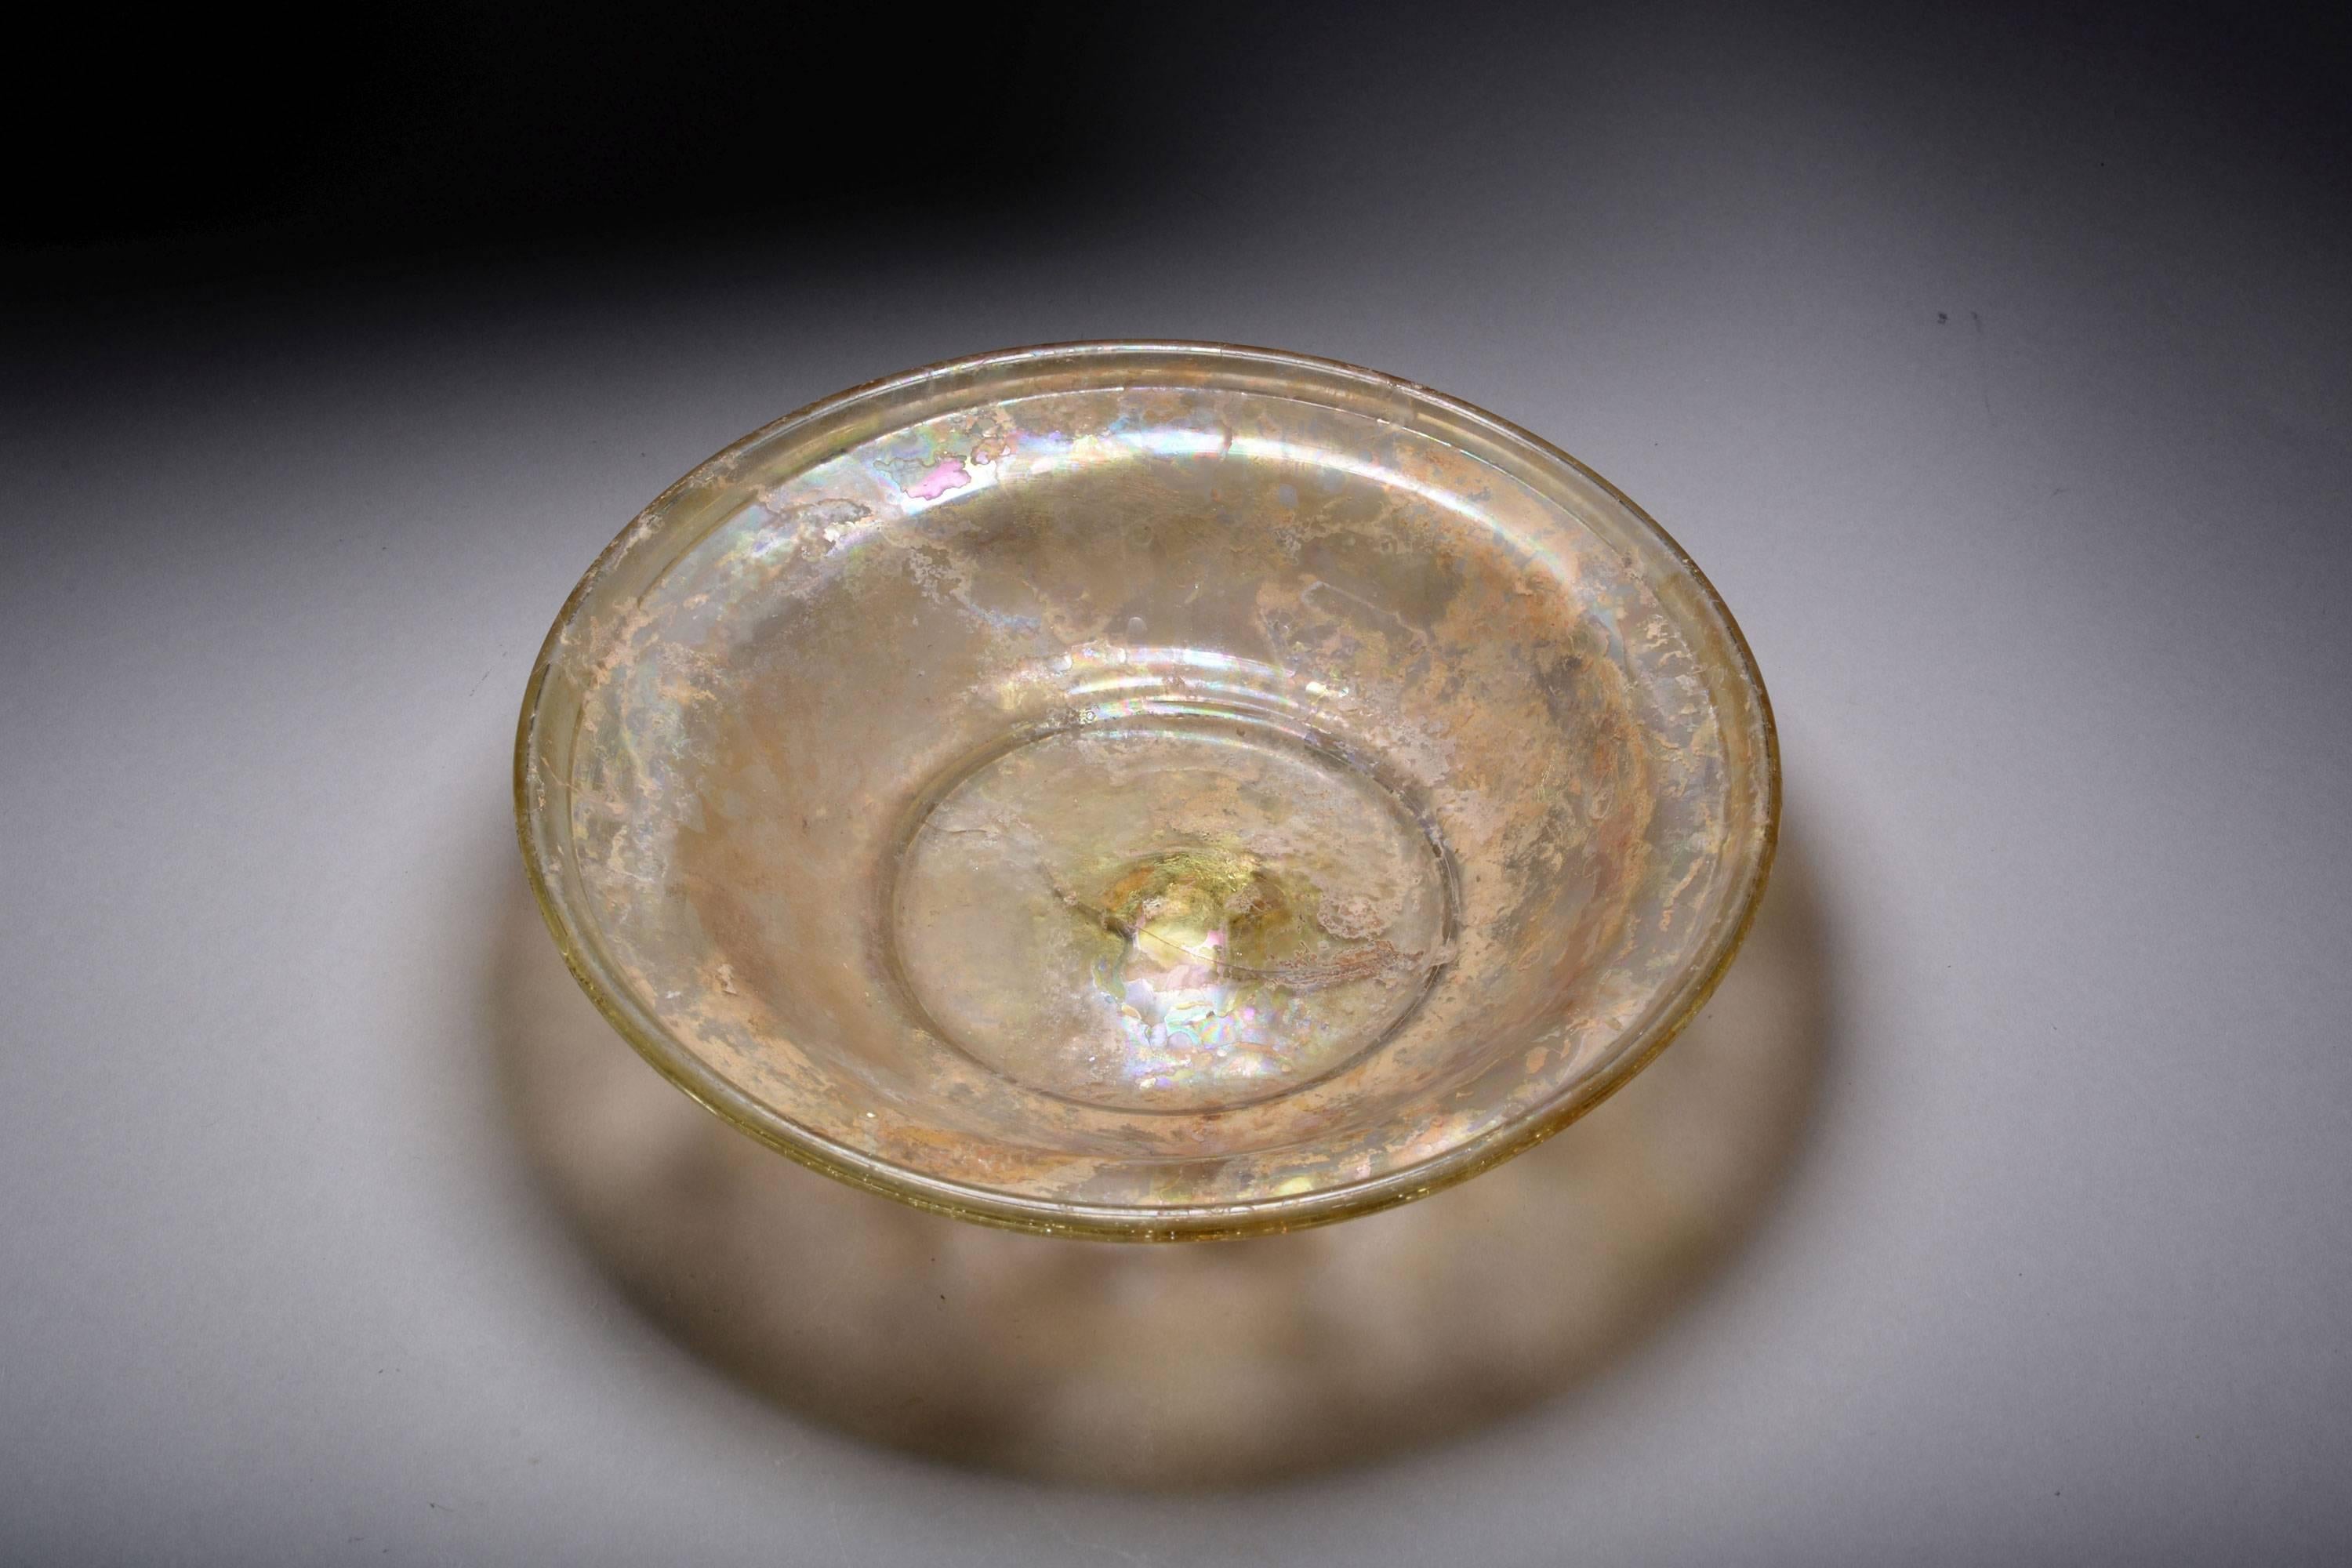 An ancient Roman glass serving dish, dating to 350–500 AD.

A beautifully balanced glass dish and an exceptional example of its type. Although the elite of society would eat from gold and silver plates, many more used glass vessels for serving